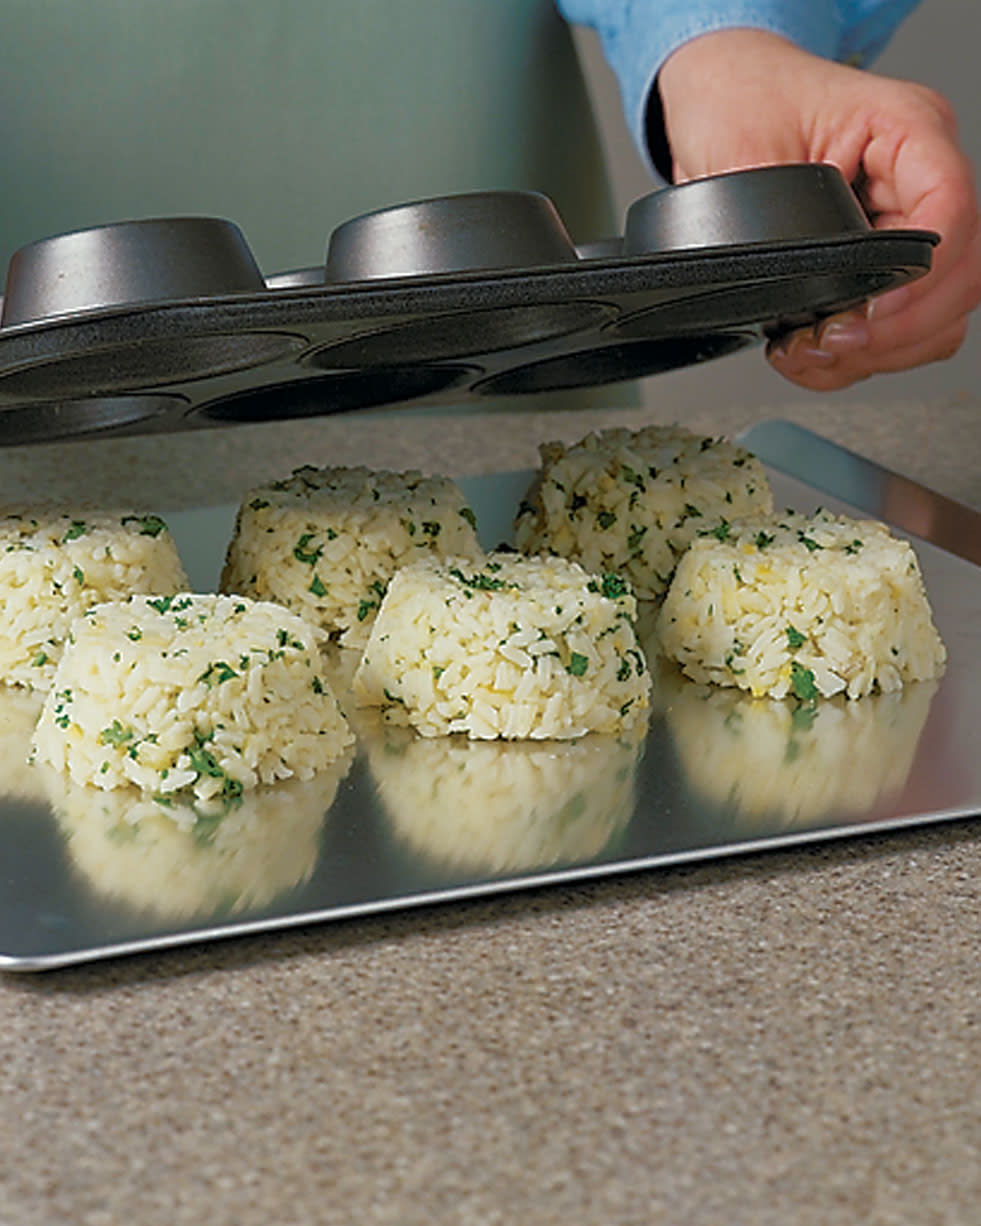 Tips-How-to-Make-Individual-Servings-Using-a-Muffin-Tin